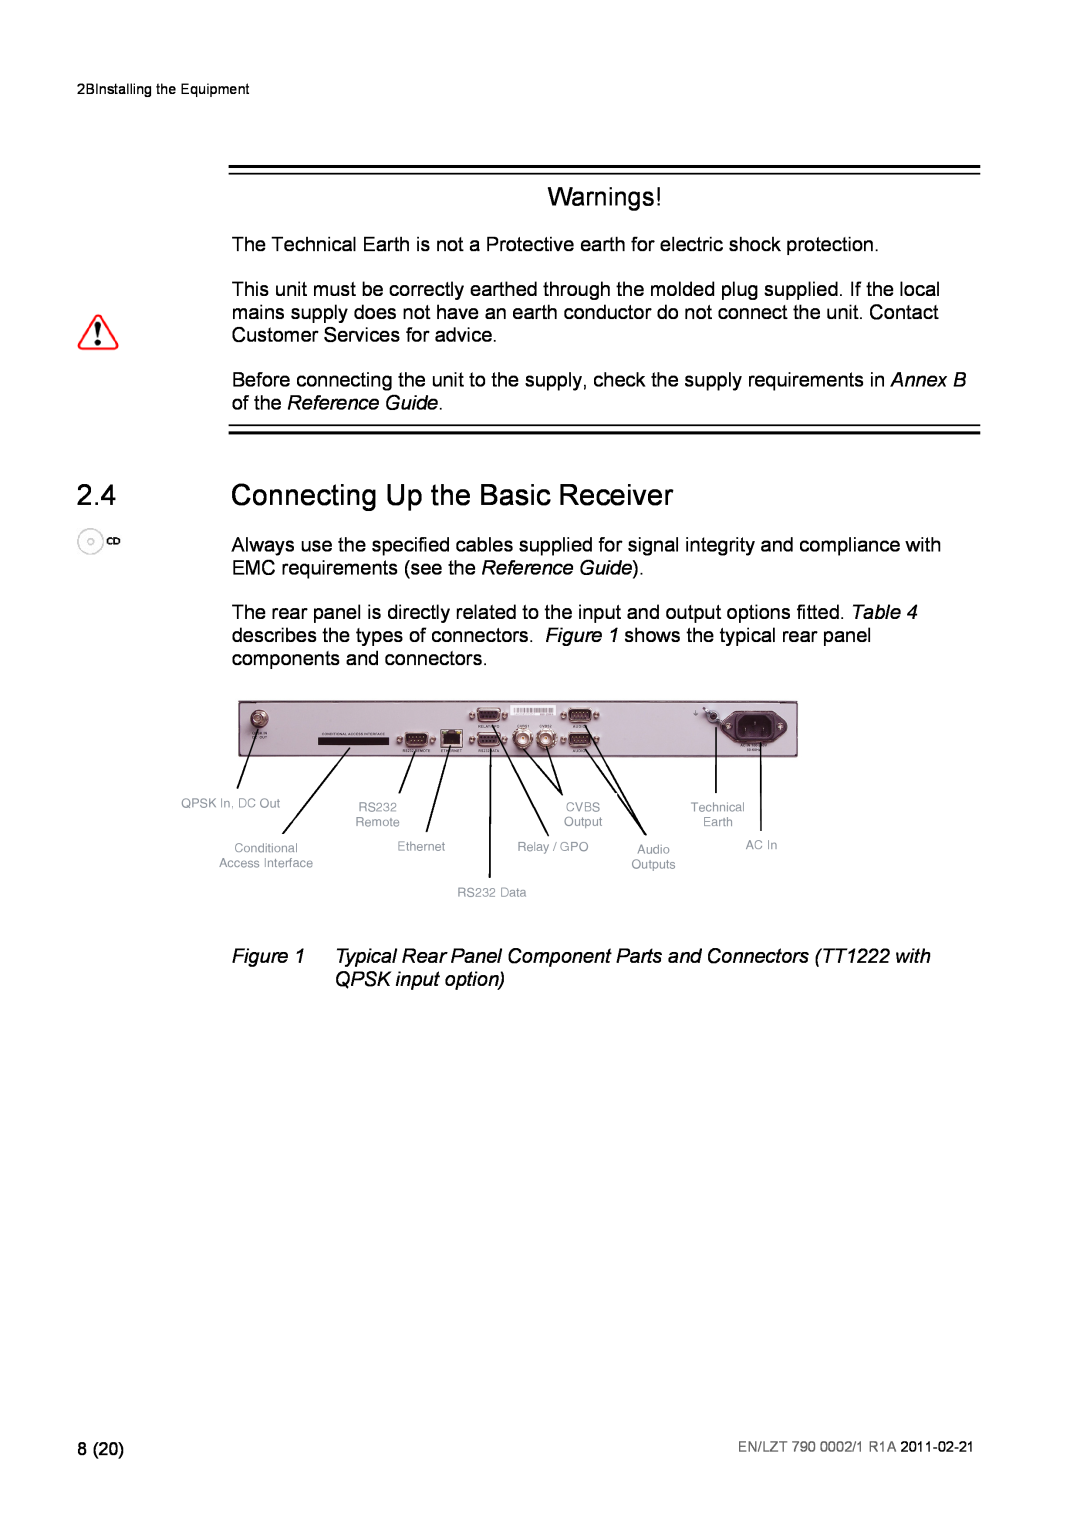 Ericsson TT1222 manual 2.4Connecting Up the Basic Receiver, Warnings 